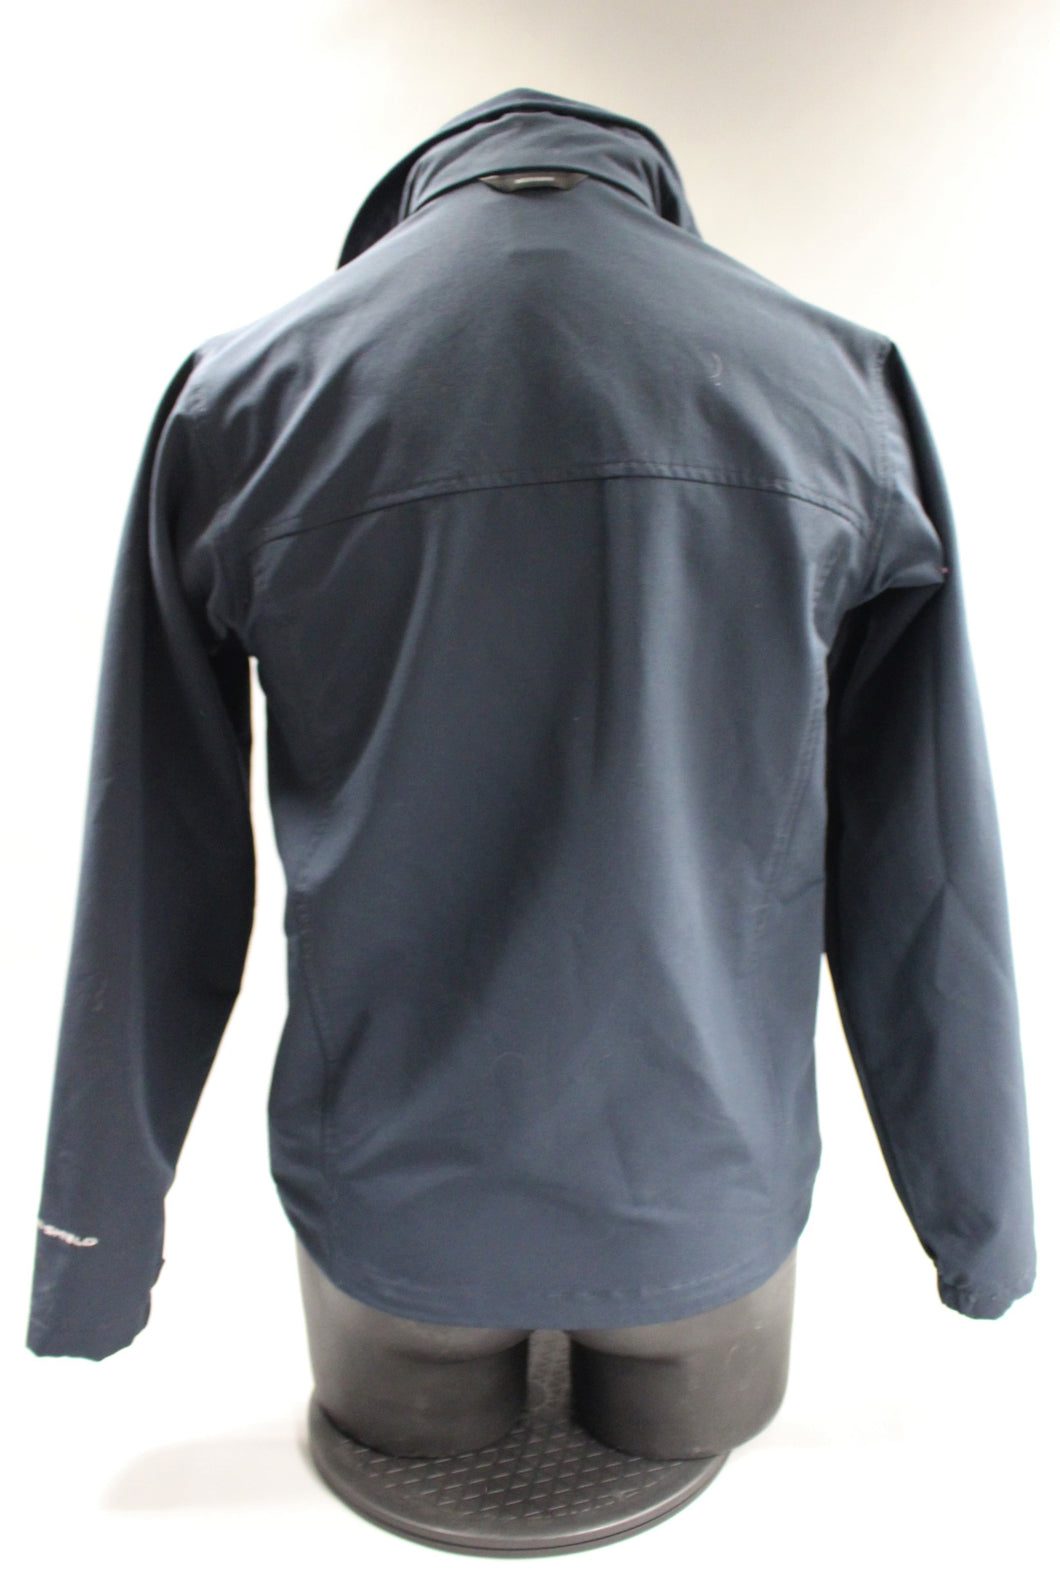 Columbia Omni-Shield Interchange Jacket, Small – Military Steals and Surplus